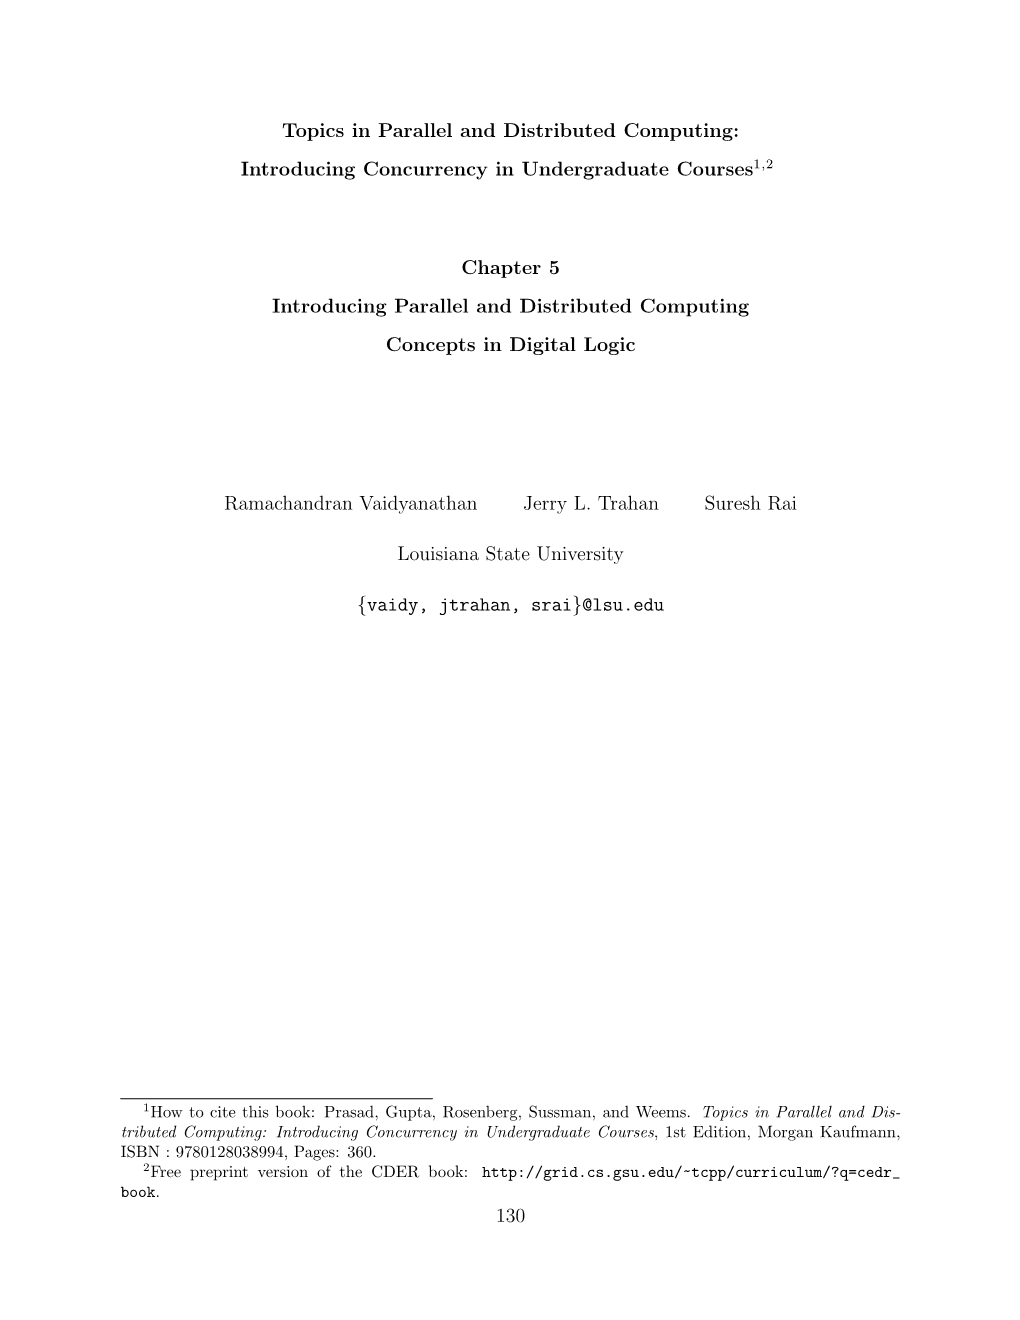 Topics in Parallel and Distributed Computing: Introducing Concurrency in Undergraduate Courses1,2